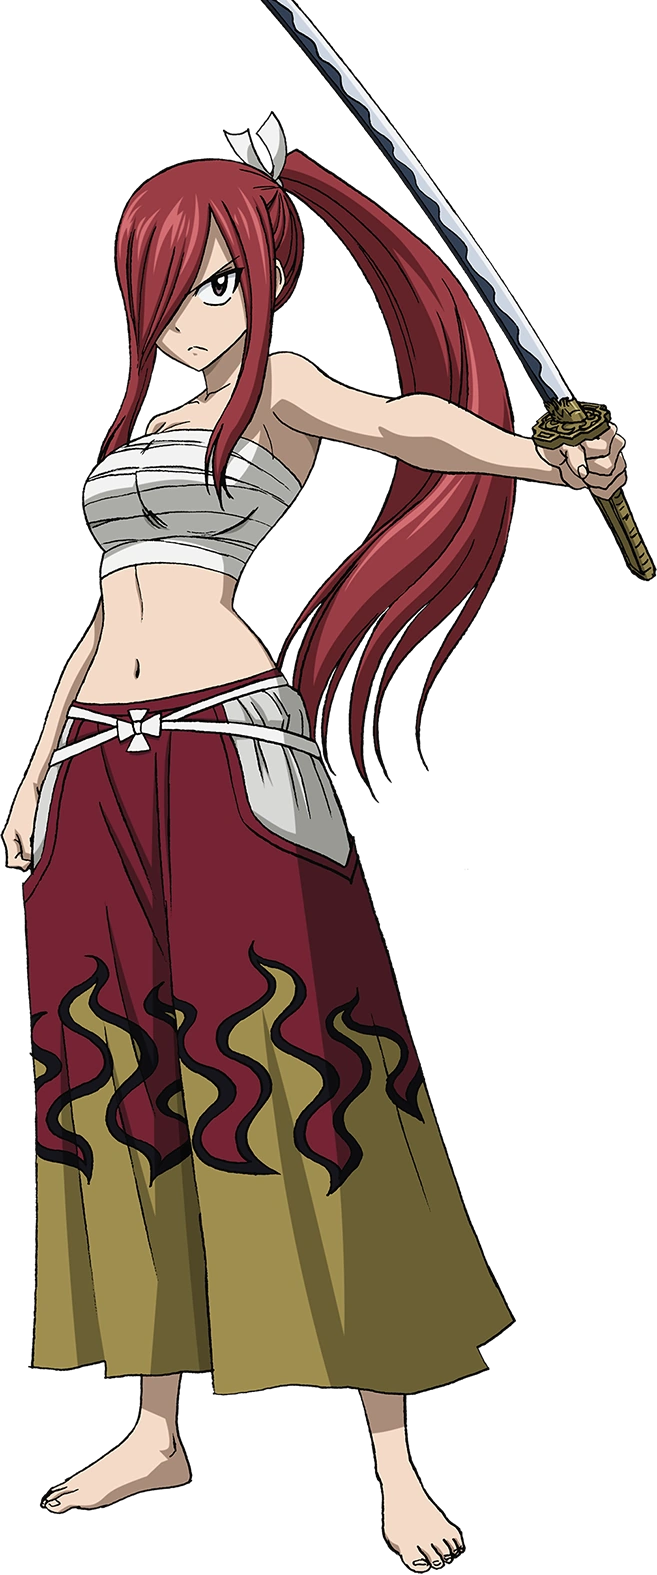 373 x 549 px  Transparent PNG images of anime scenes. Roronoa